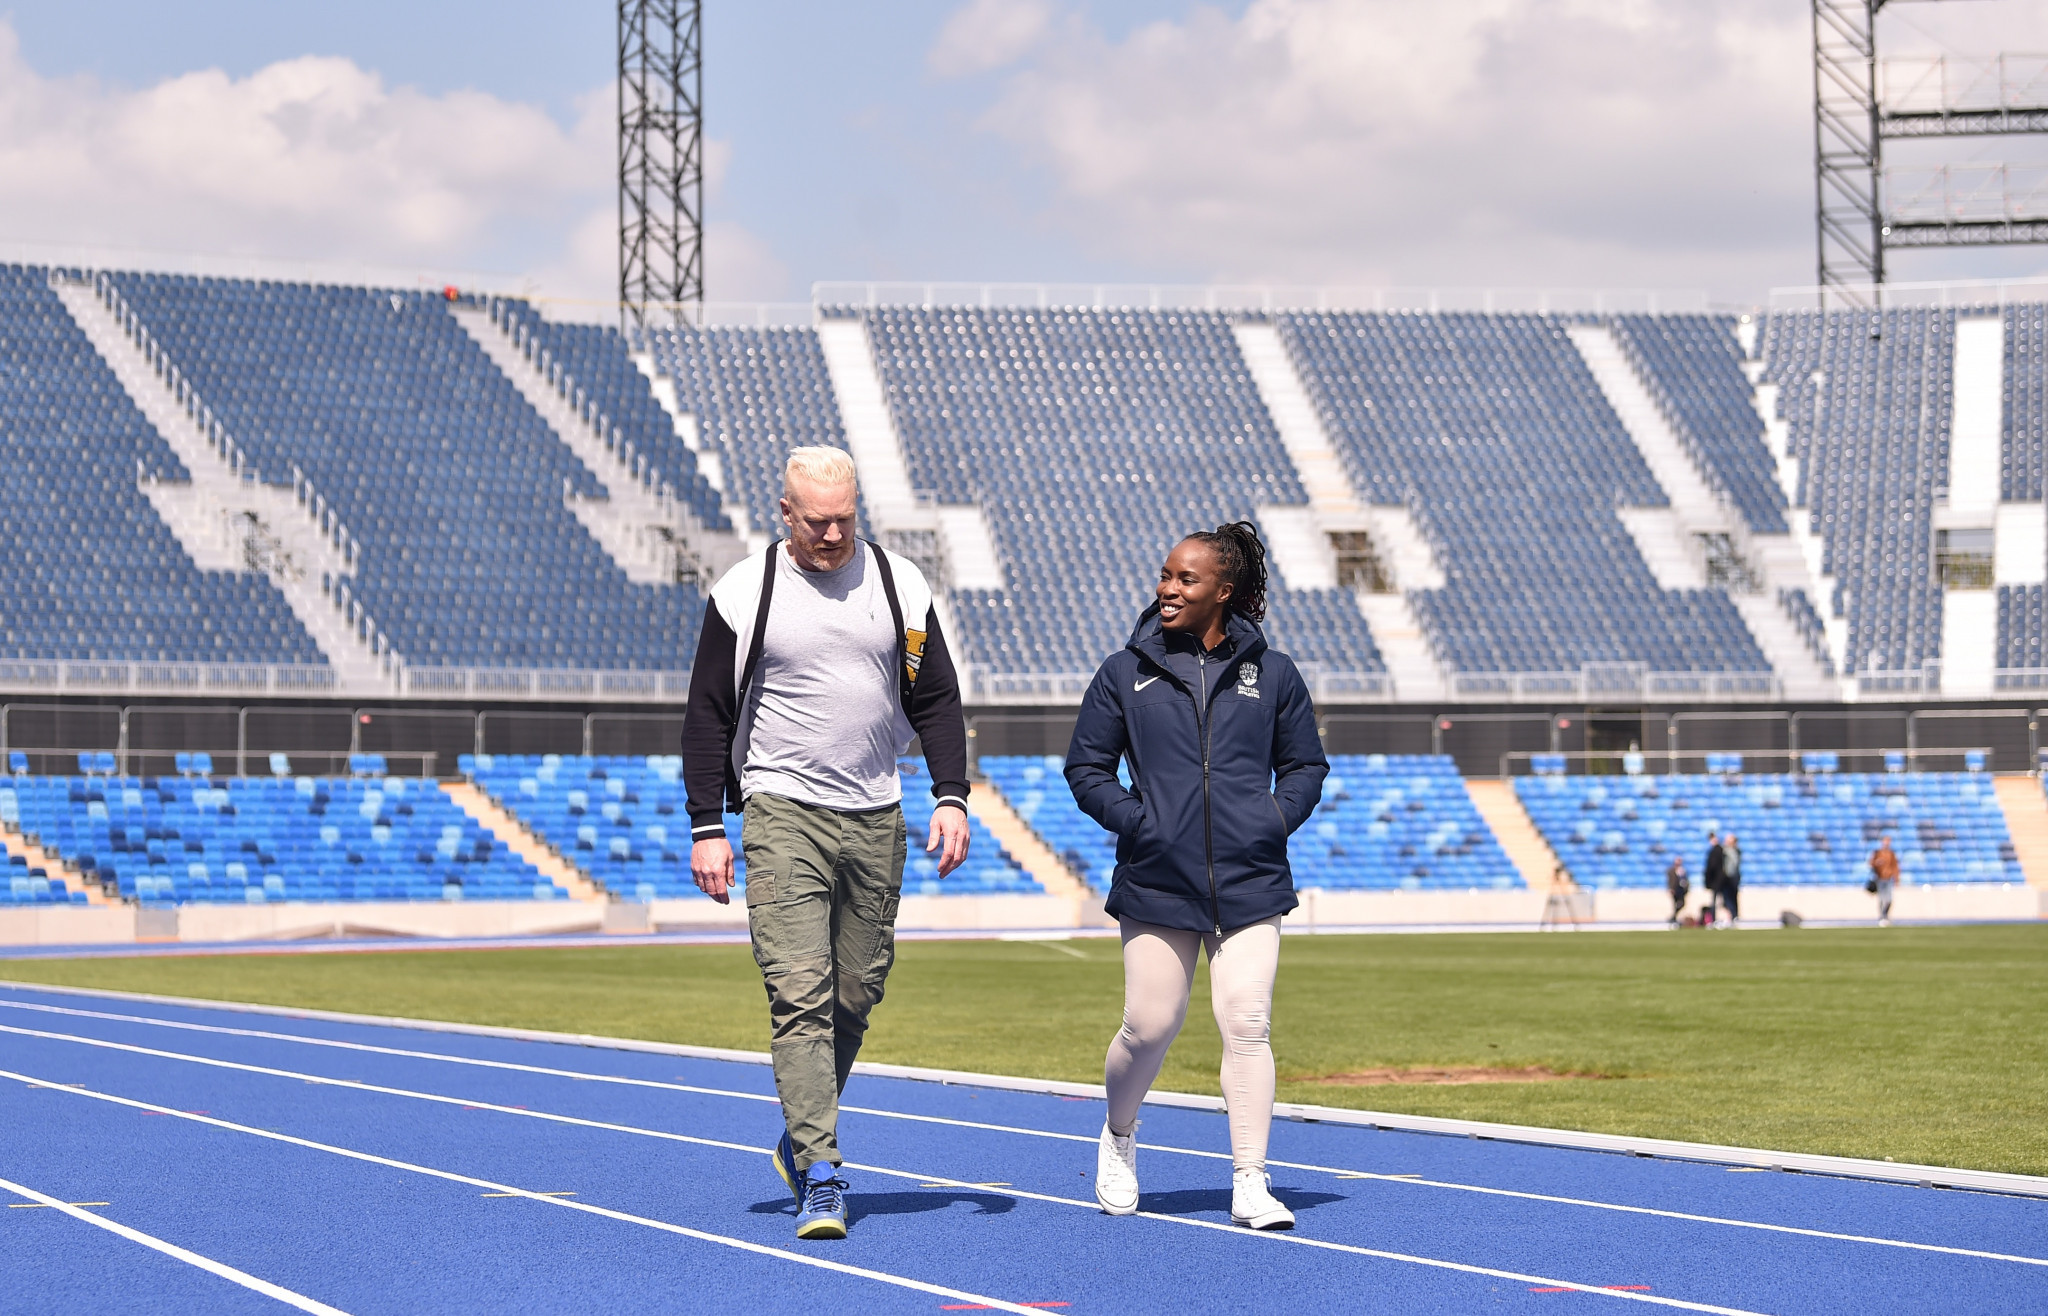 Former British athletes Iwan Thomas and Marilyn Okoro were impressed by the transformation of the 30,000-capacity Alexander Stadium ©British Athletics and Getty Images